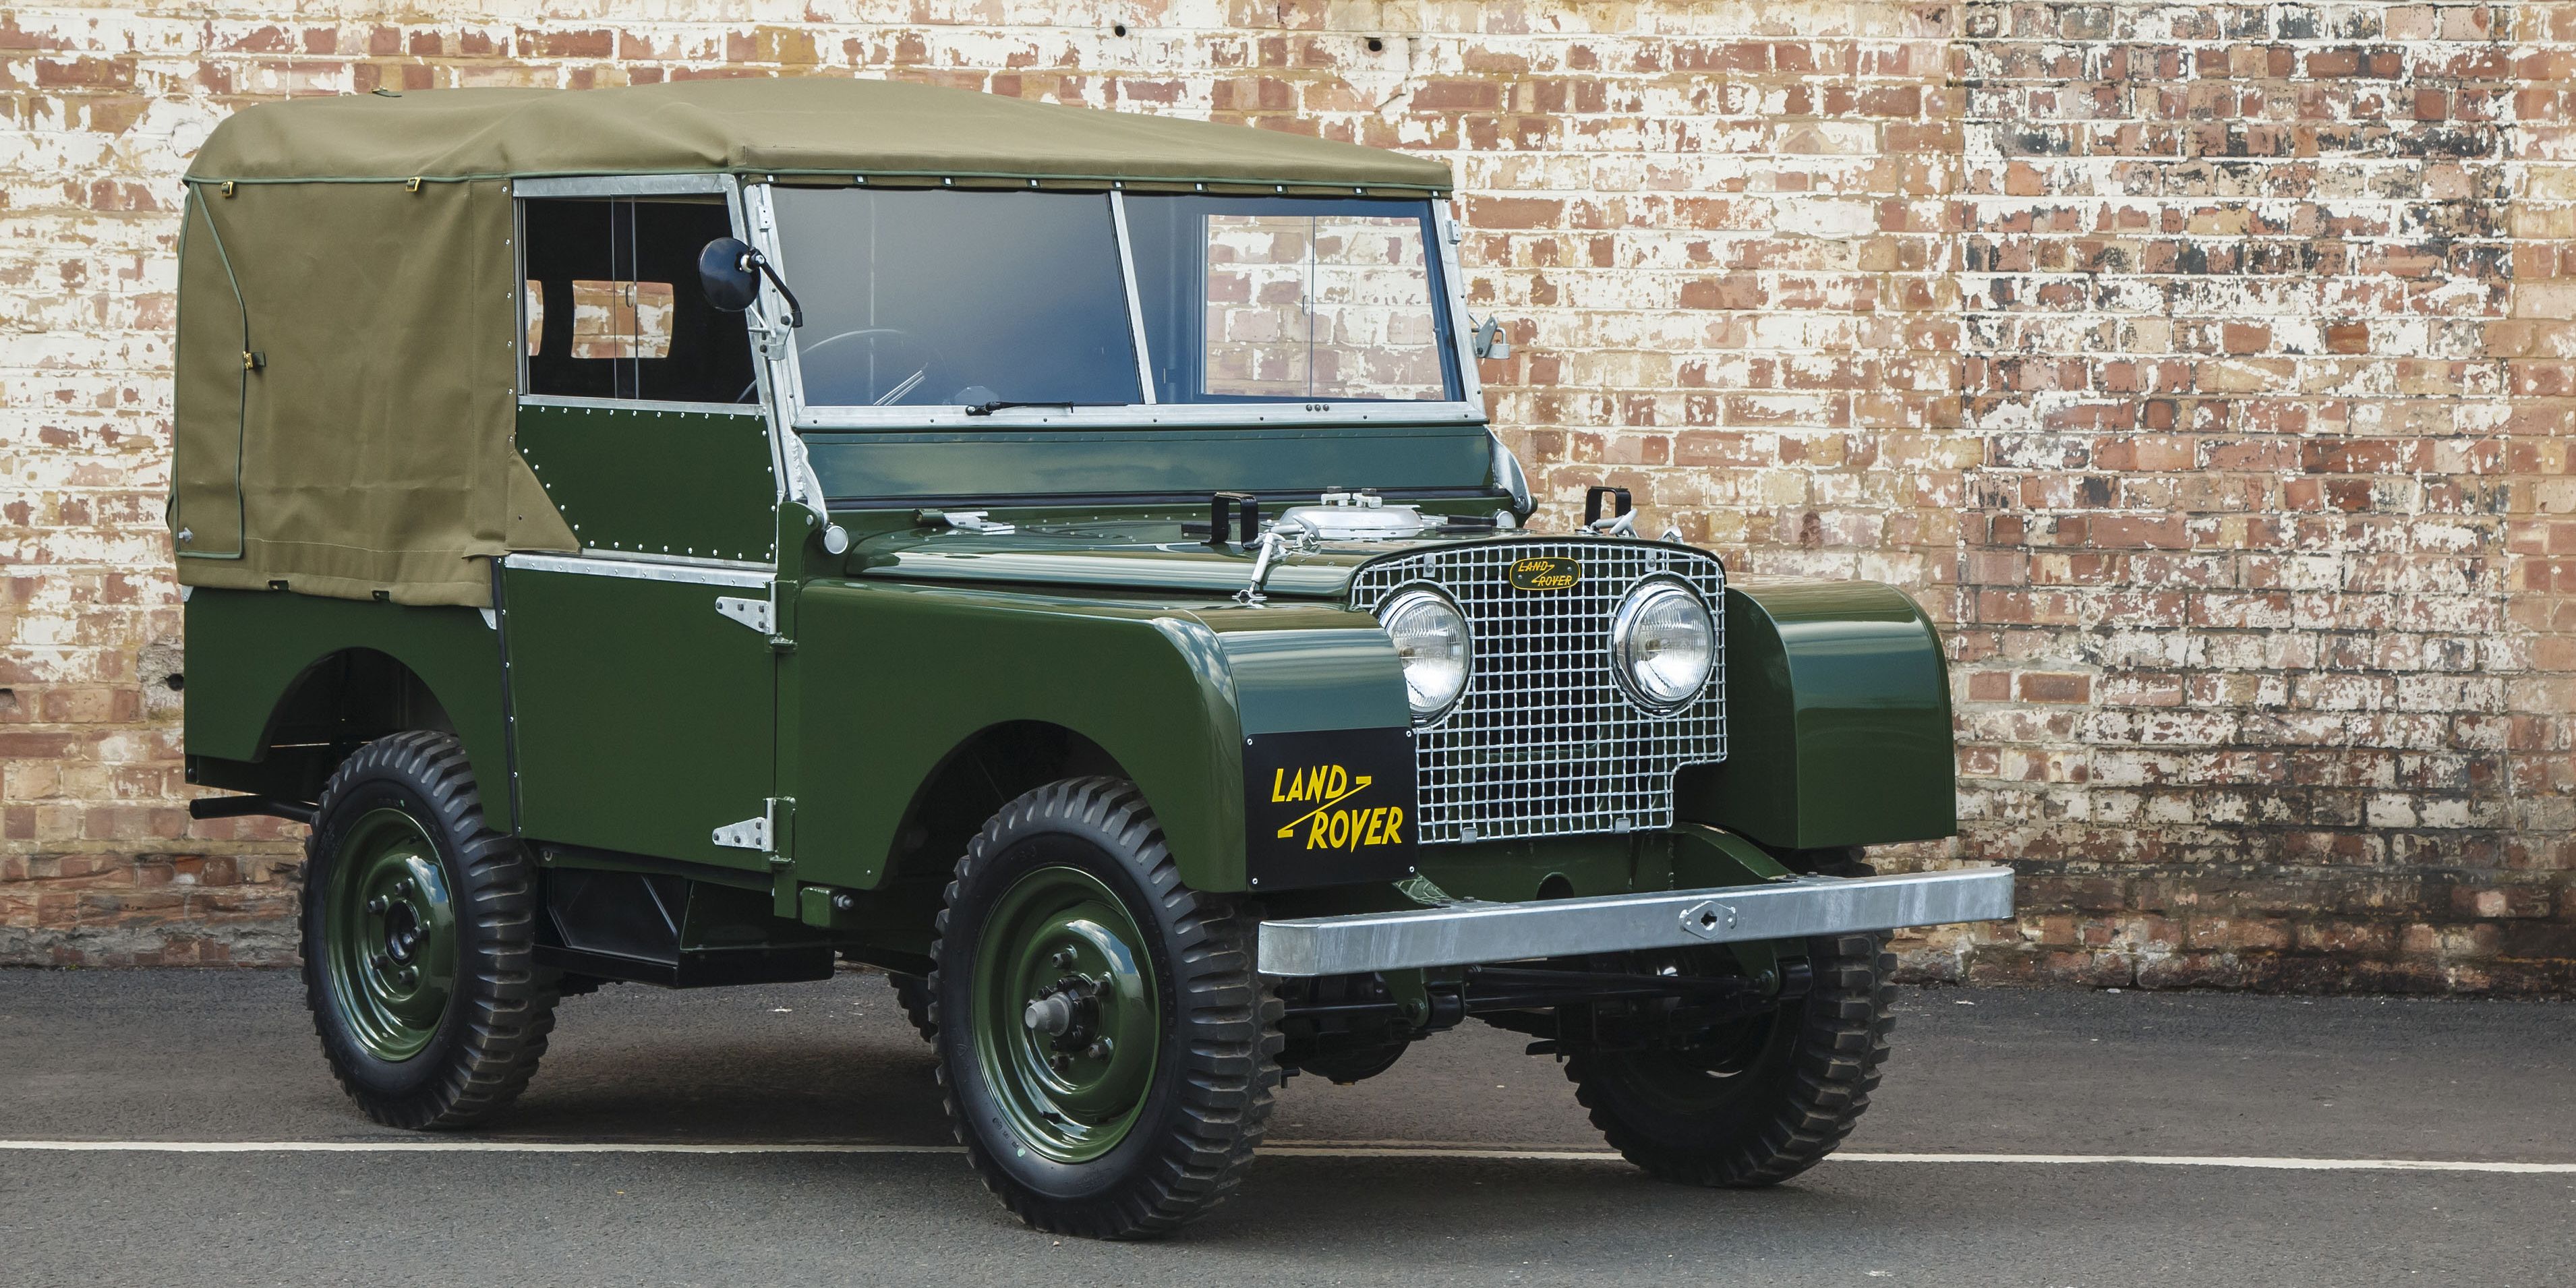 Machtigen Stun schedel Land Rover Will Sell You a Meticulously Restored Series 1 From 1948